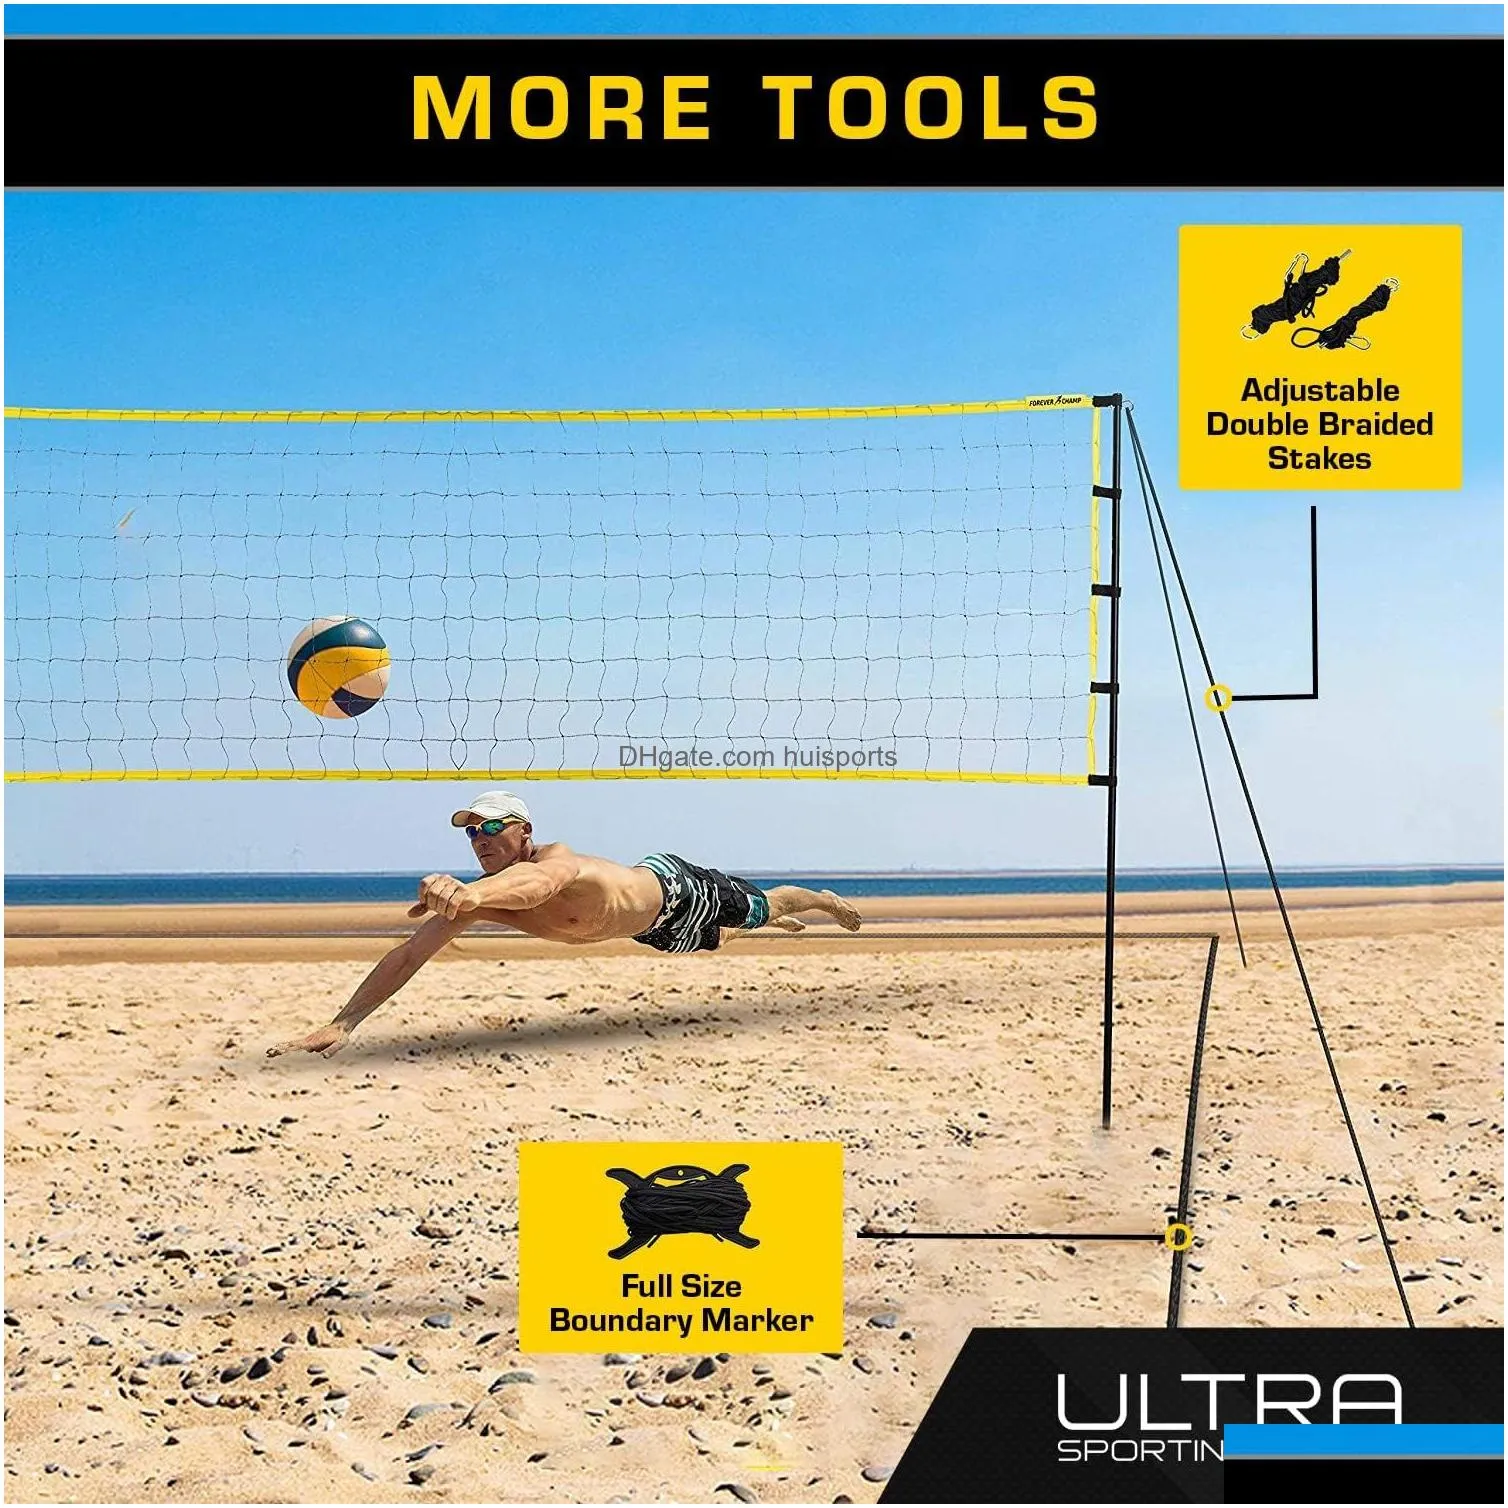 volleyball net - includes 32x3 feet regulation size net 8.5-inch pu volleyball carrying bag boundary lines steel poles pump - height adjustable for